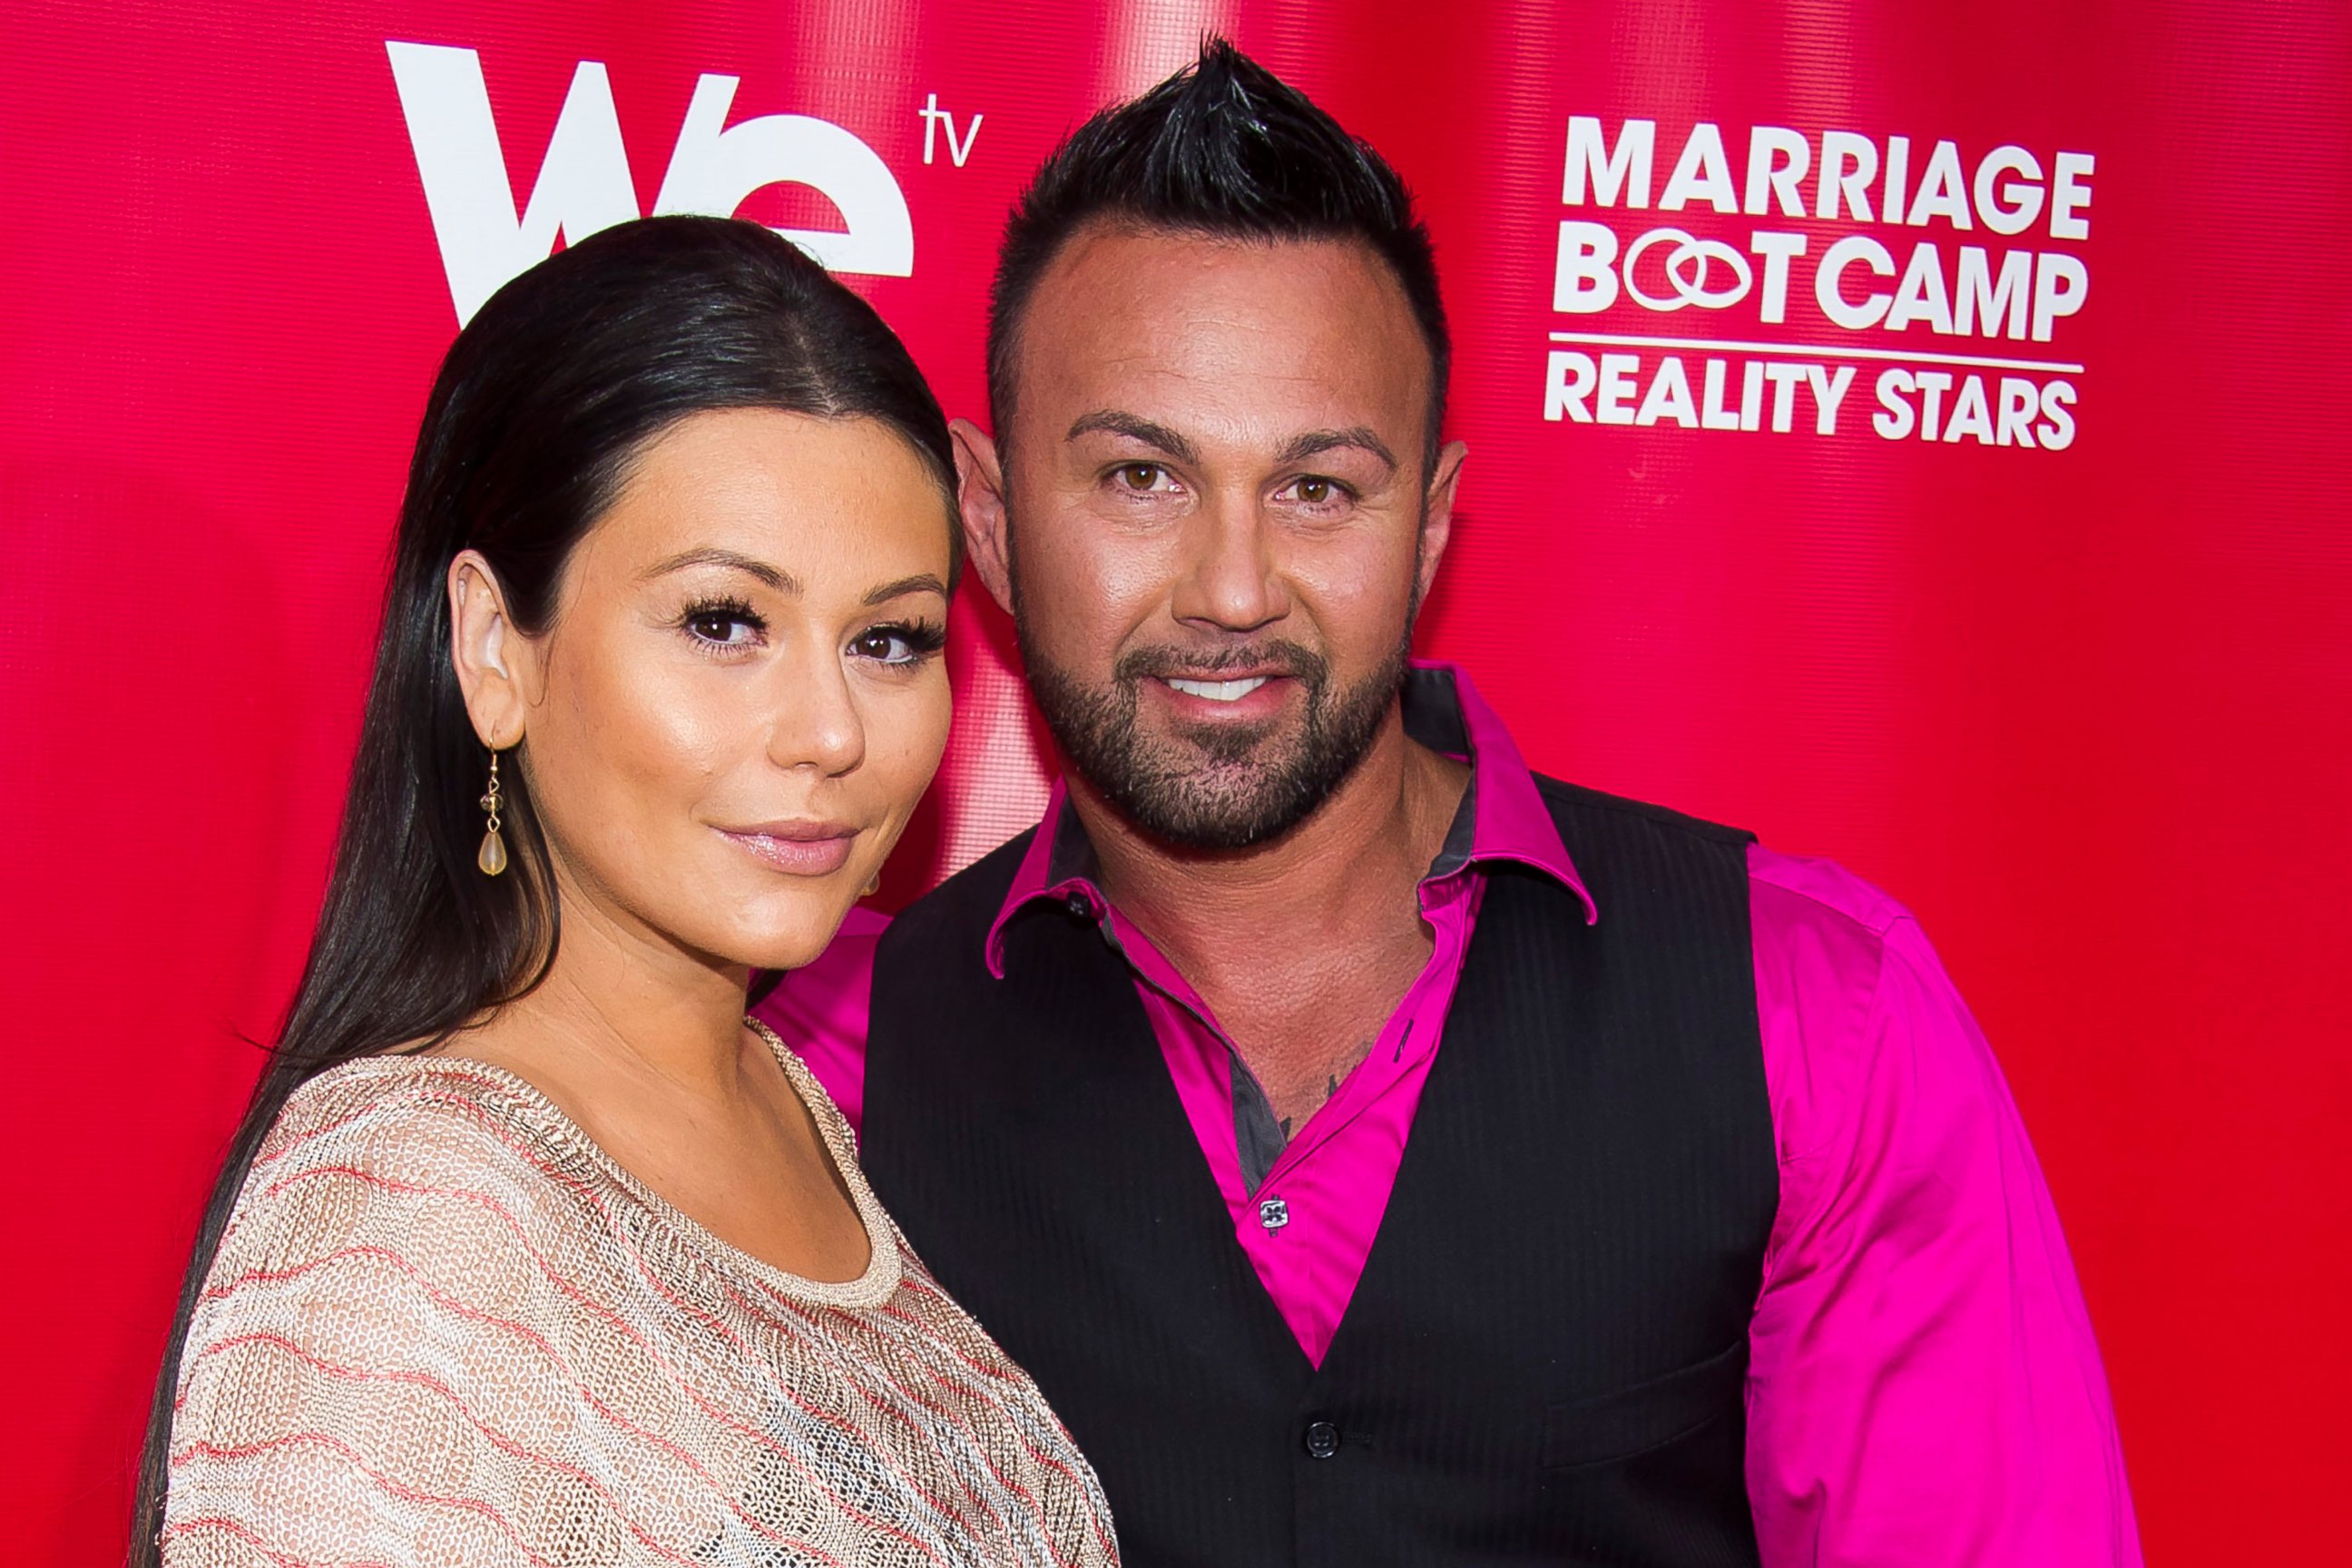 PHOTO: In this May 29, 2014 file photo, Jenni "JWoww" Farley and Roger Mathews, with whom she is currently undergoing a divorce, attend WE tv's "Marriage Boot Camp: Reality Stars" party in New York.